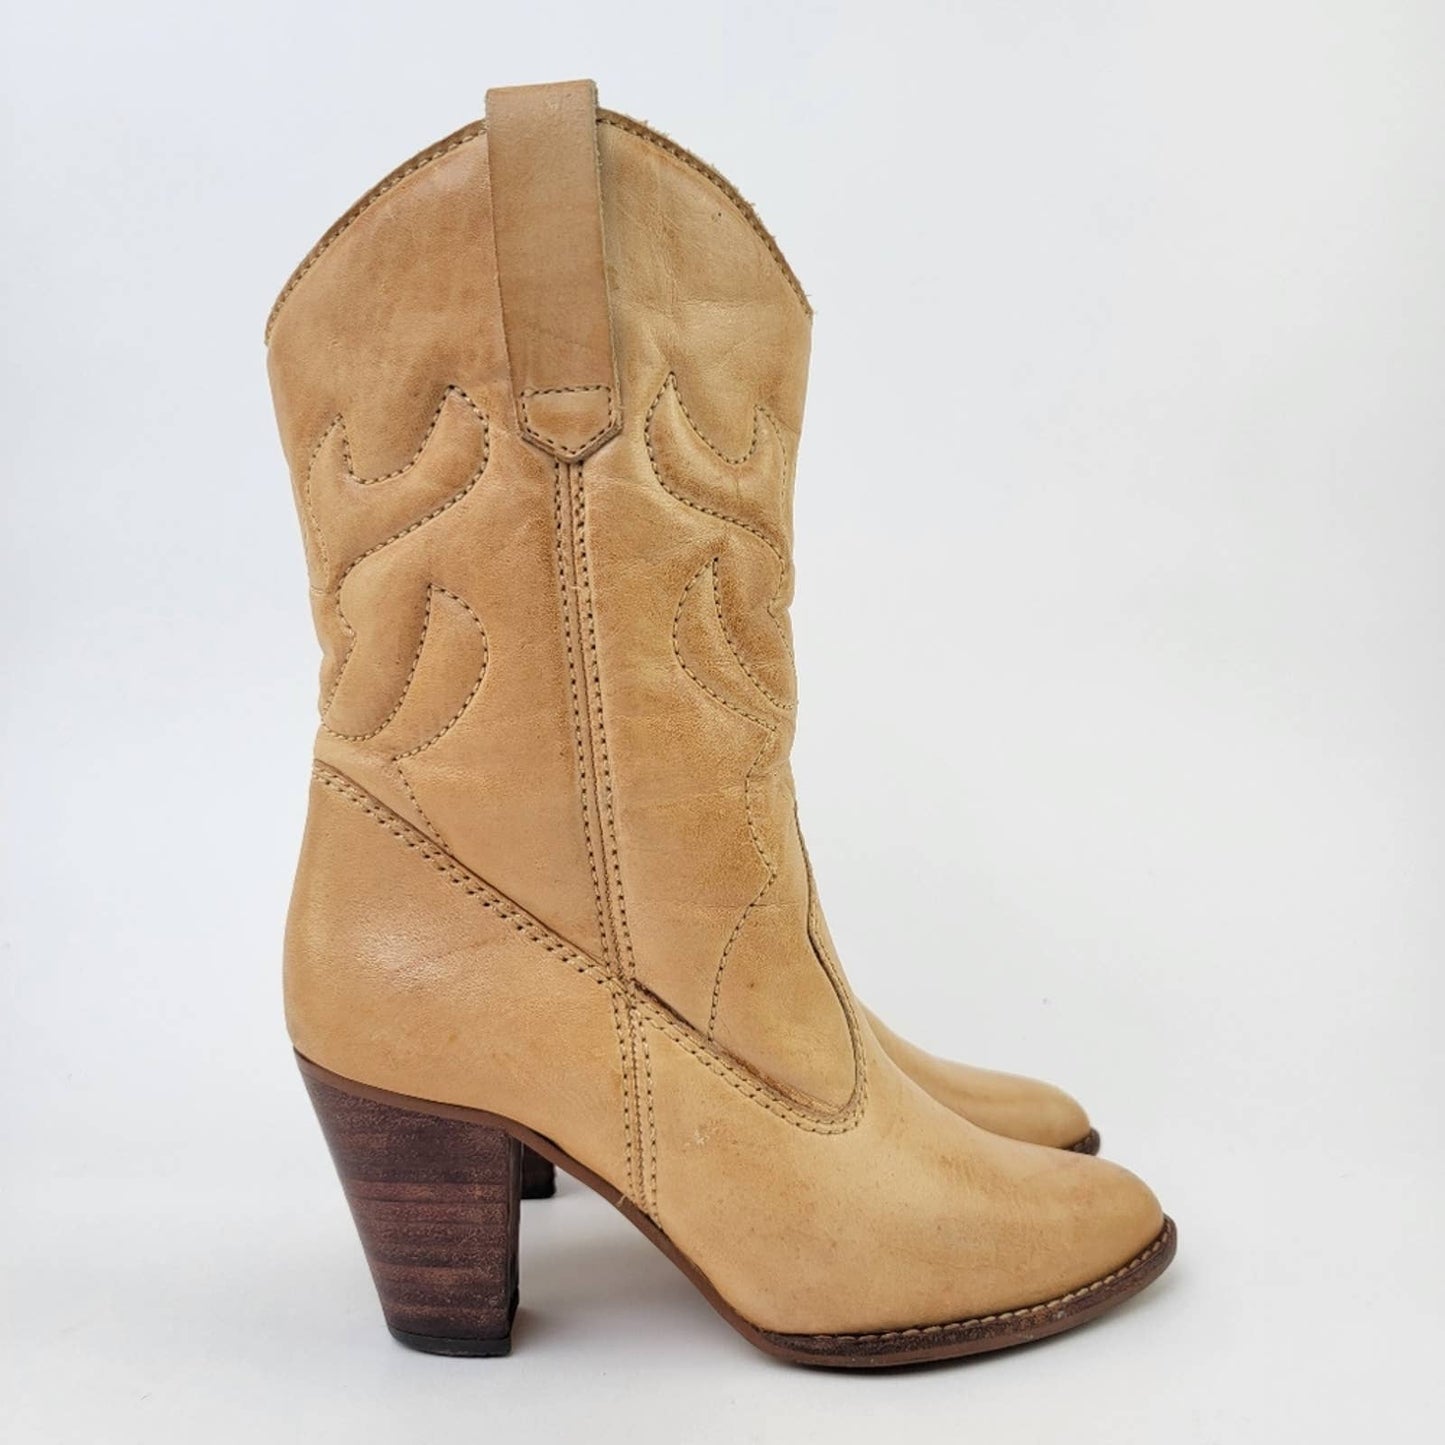 Vintage 70s Leather Western Cowboy Boots - 7